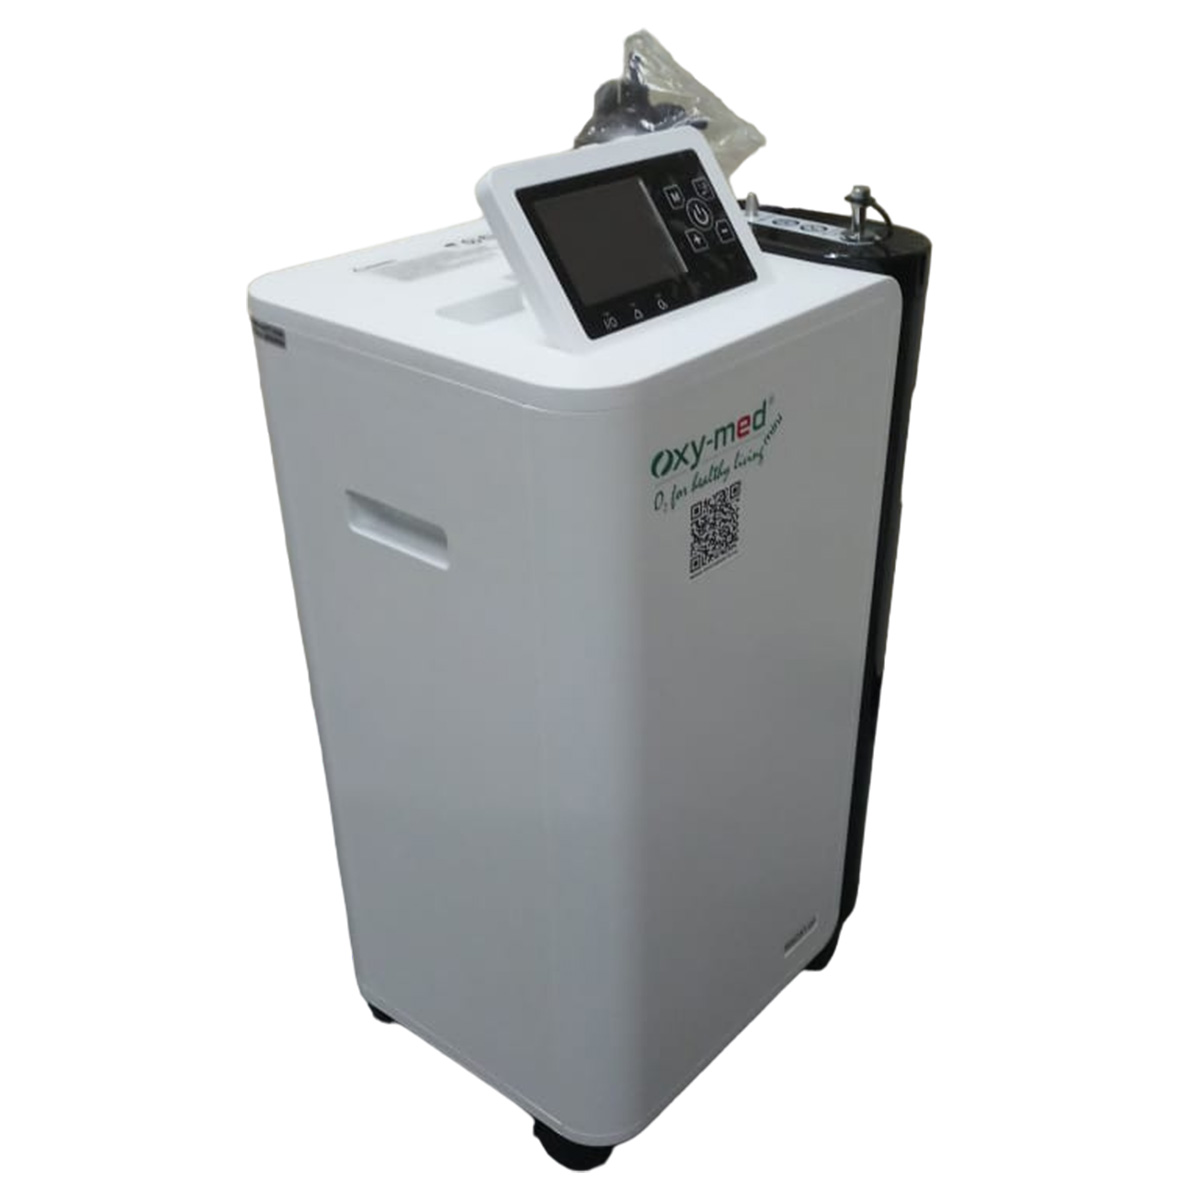 5 Lpm Oxymed Oxygen Concentrator On Sale Suppliers, Service Provider in Adarsh nagar